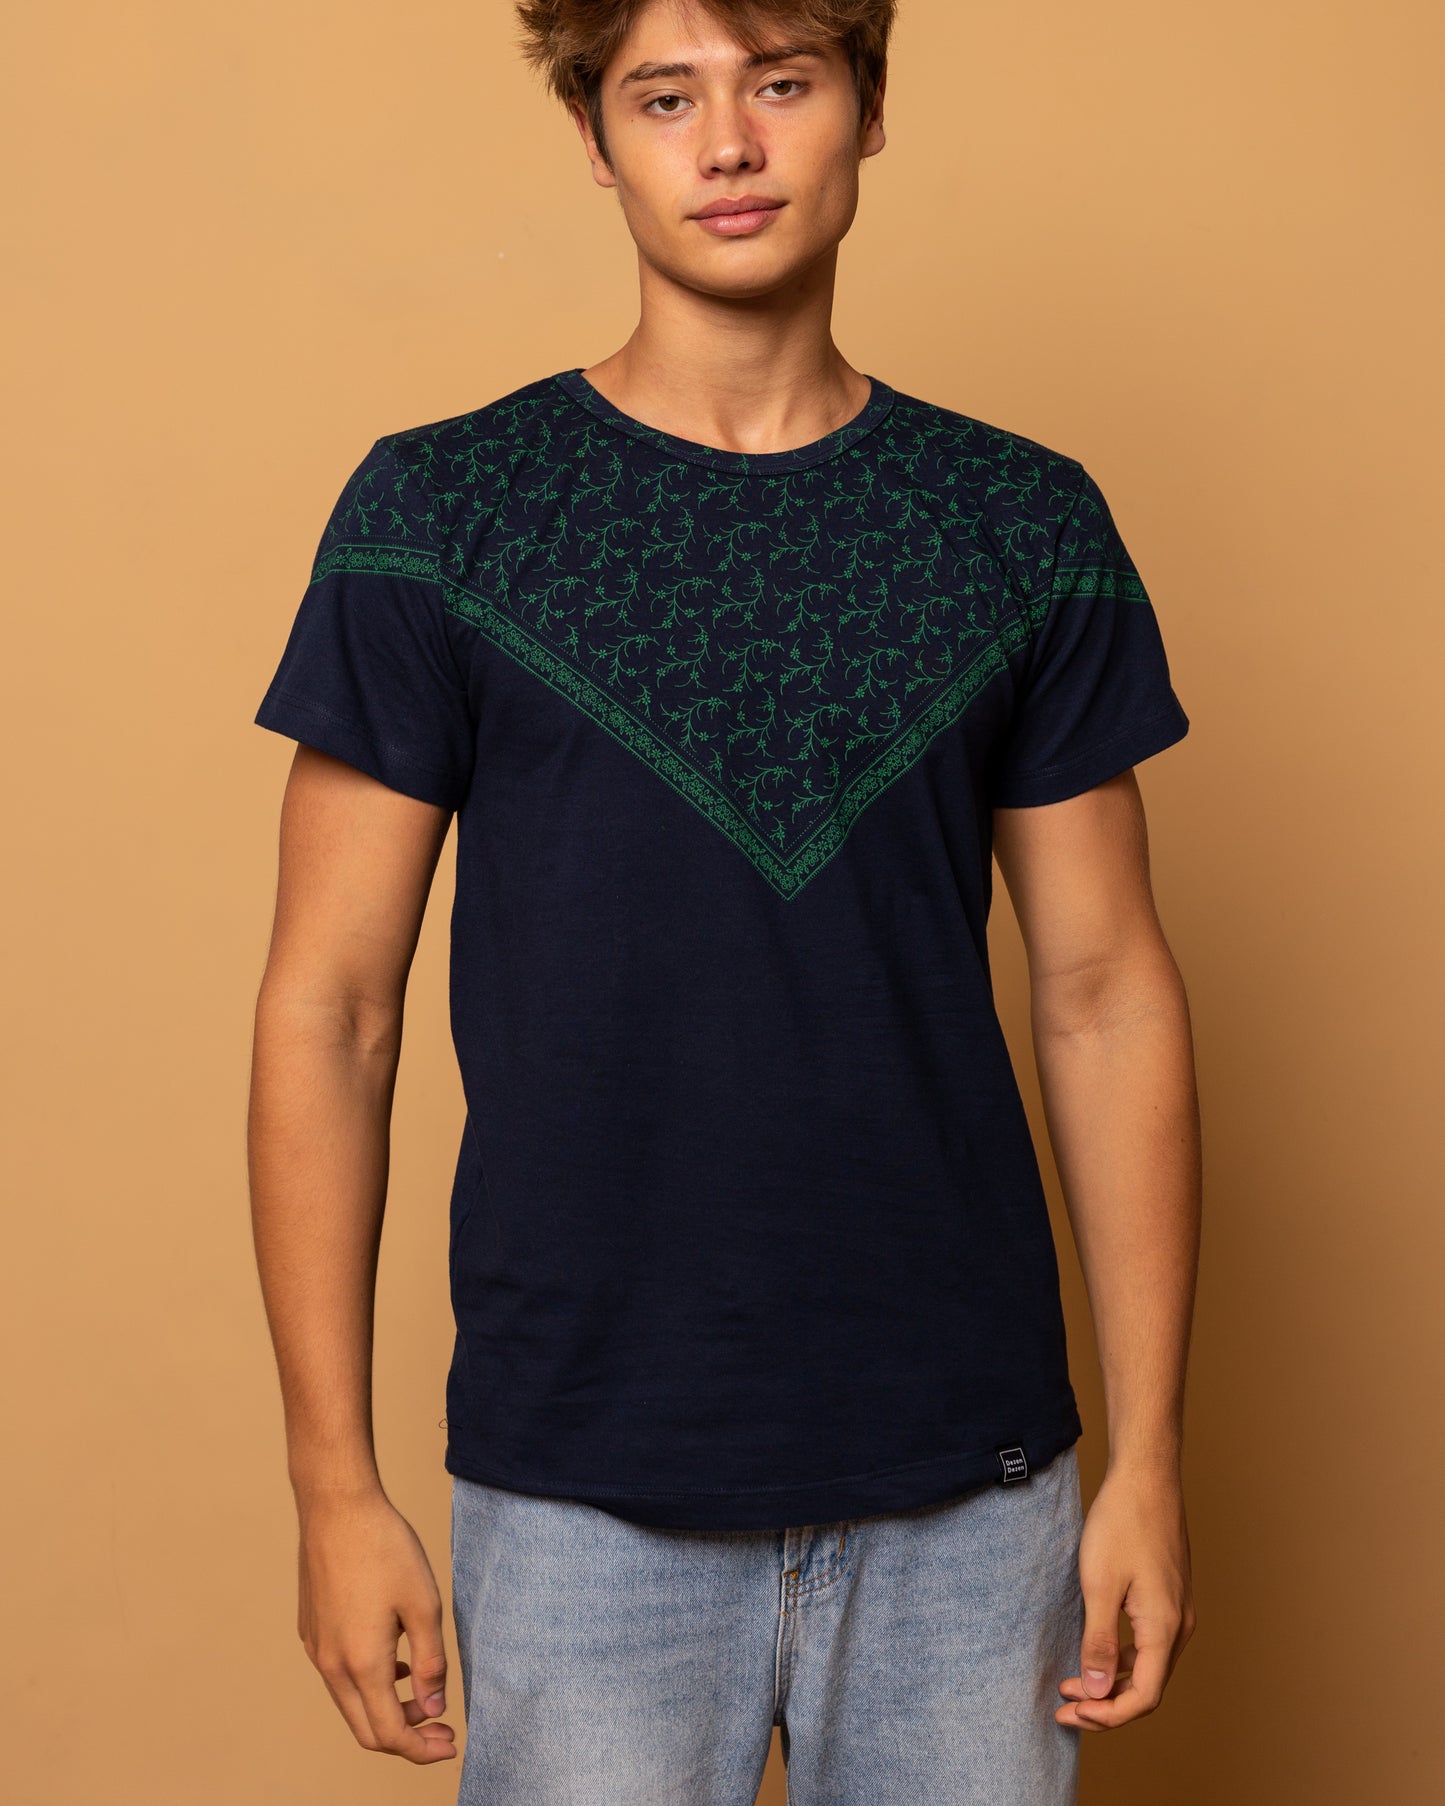 T-Shirt unisex in cotone stampata a mano